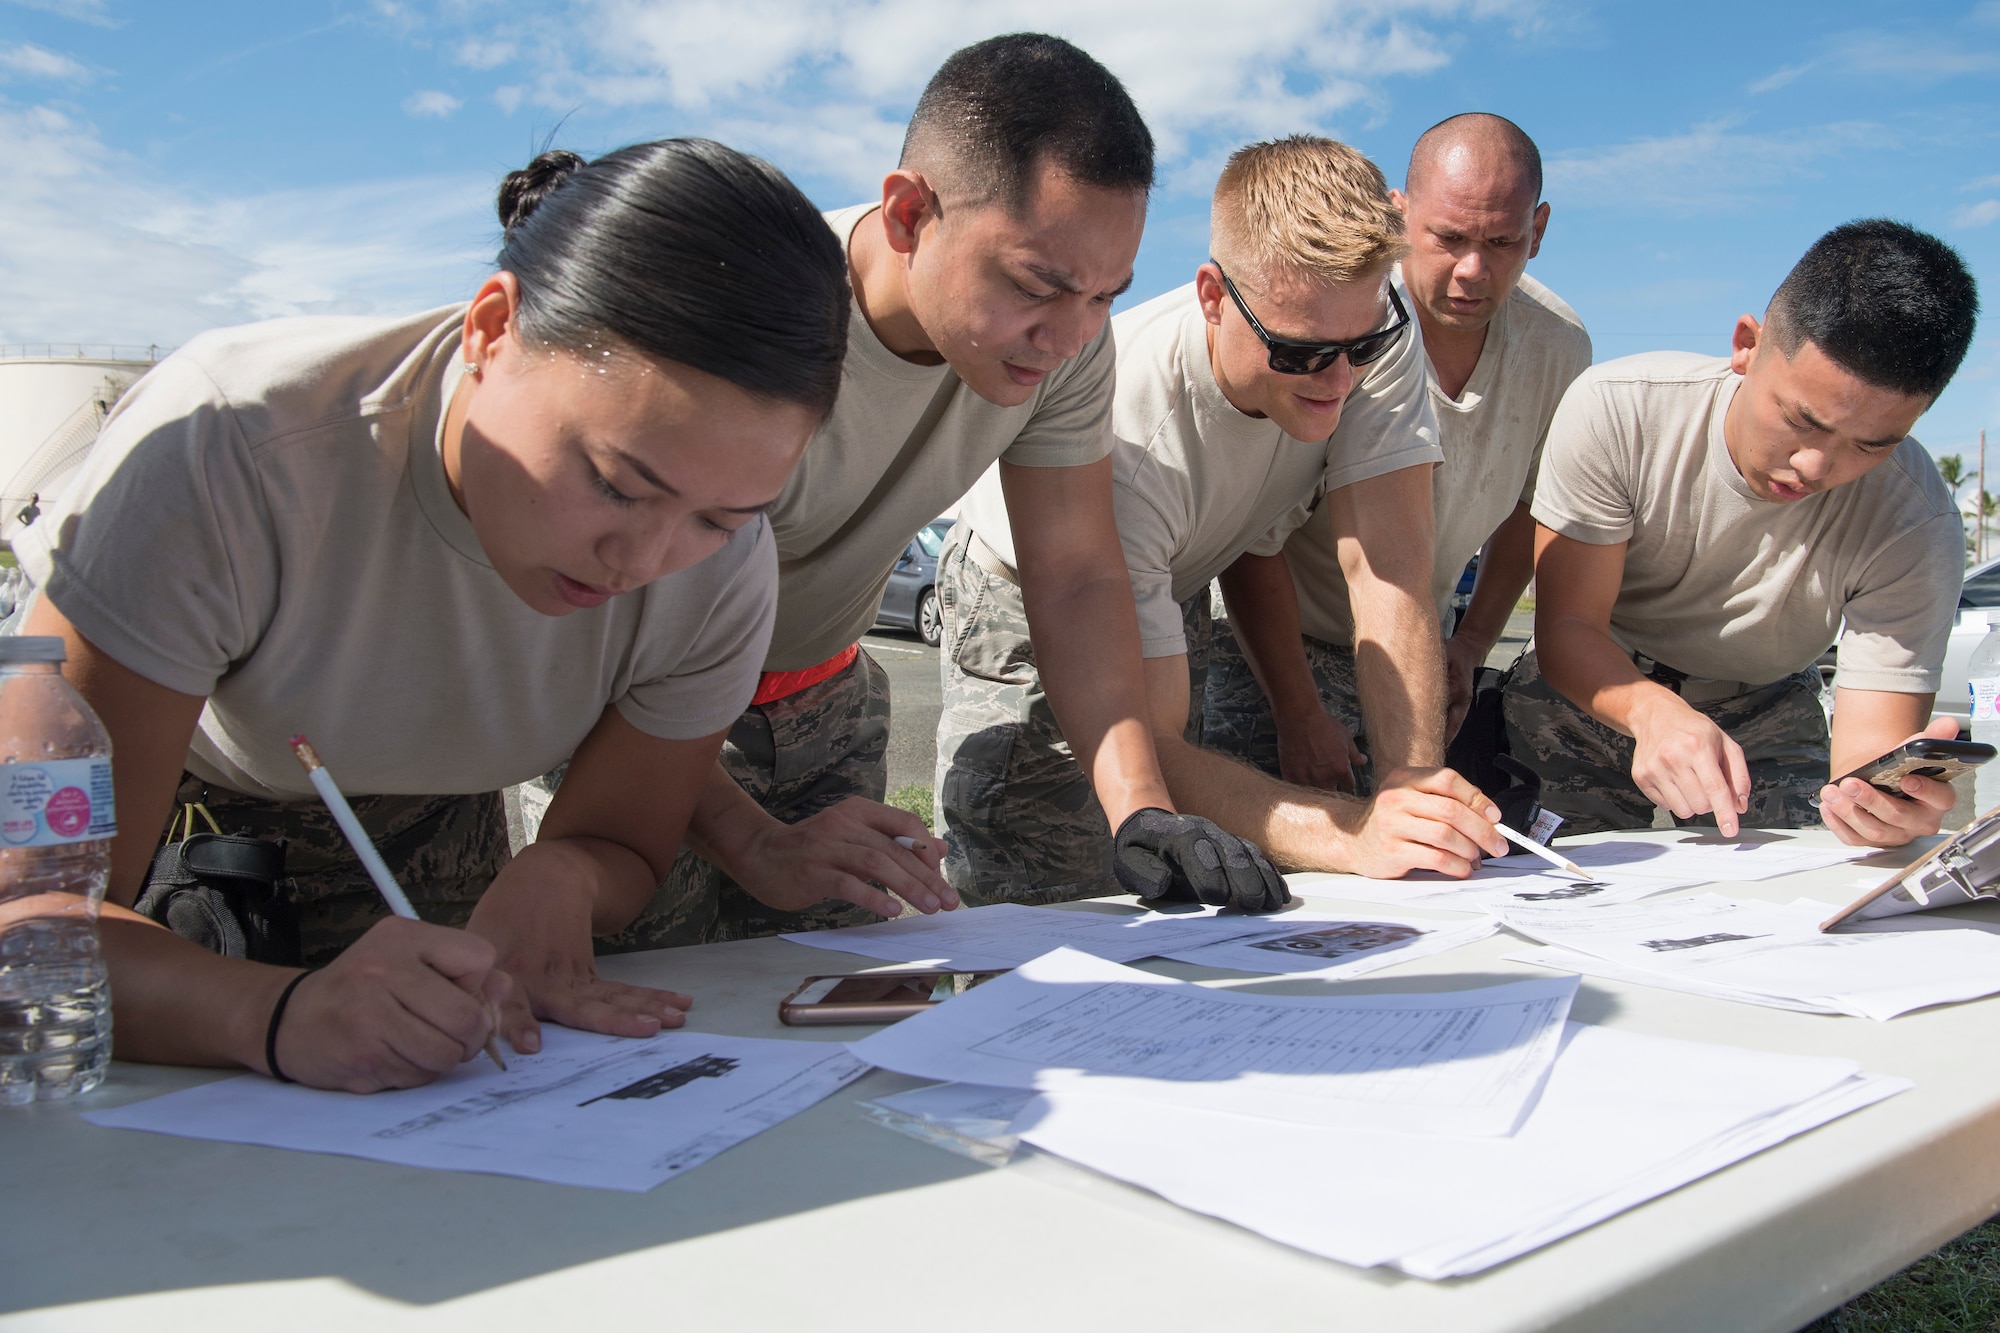 U.S. Air Force Staff Sergeant Hui Jin Kim, Senior Airman Brian Garlejo, Staff Sgt. Nathaniel Petraitis, Tech. Sgt. Isaiah Laikupu and Senior Airman Kouyo Kato, members of the Air Force Reserve’s 48th Aerial Port Squadron, calculate the proper way to balance the cargo given in the training scenario Oct. 13, 2018, at Joint Base Pearl Harbor-Hickam, Hawaii. The 48th APS, which is part of the 624th Regional Support Group, deploys qualified personnel to provide air terminal operations worldwide in support of contingency operations, exercises, unit moves, and foreign humanitarian relief or disaster operations. (U.S. Air Force photo by Master Sgt. Theanne Herrmann)